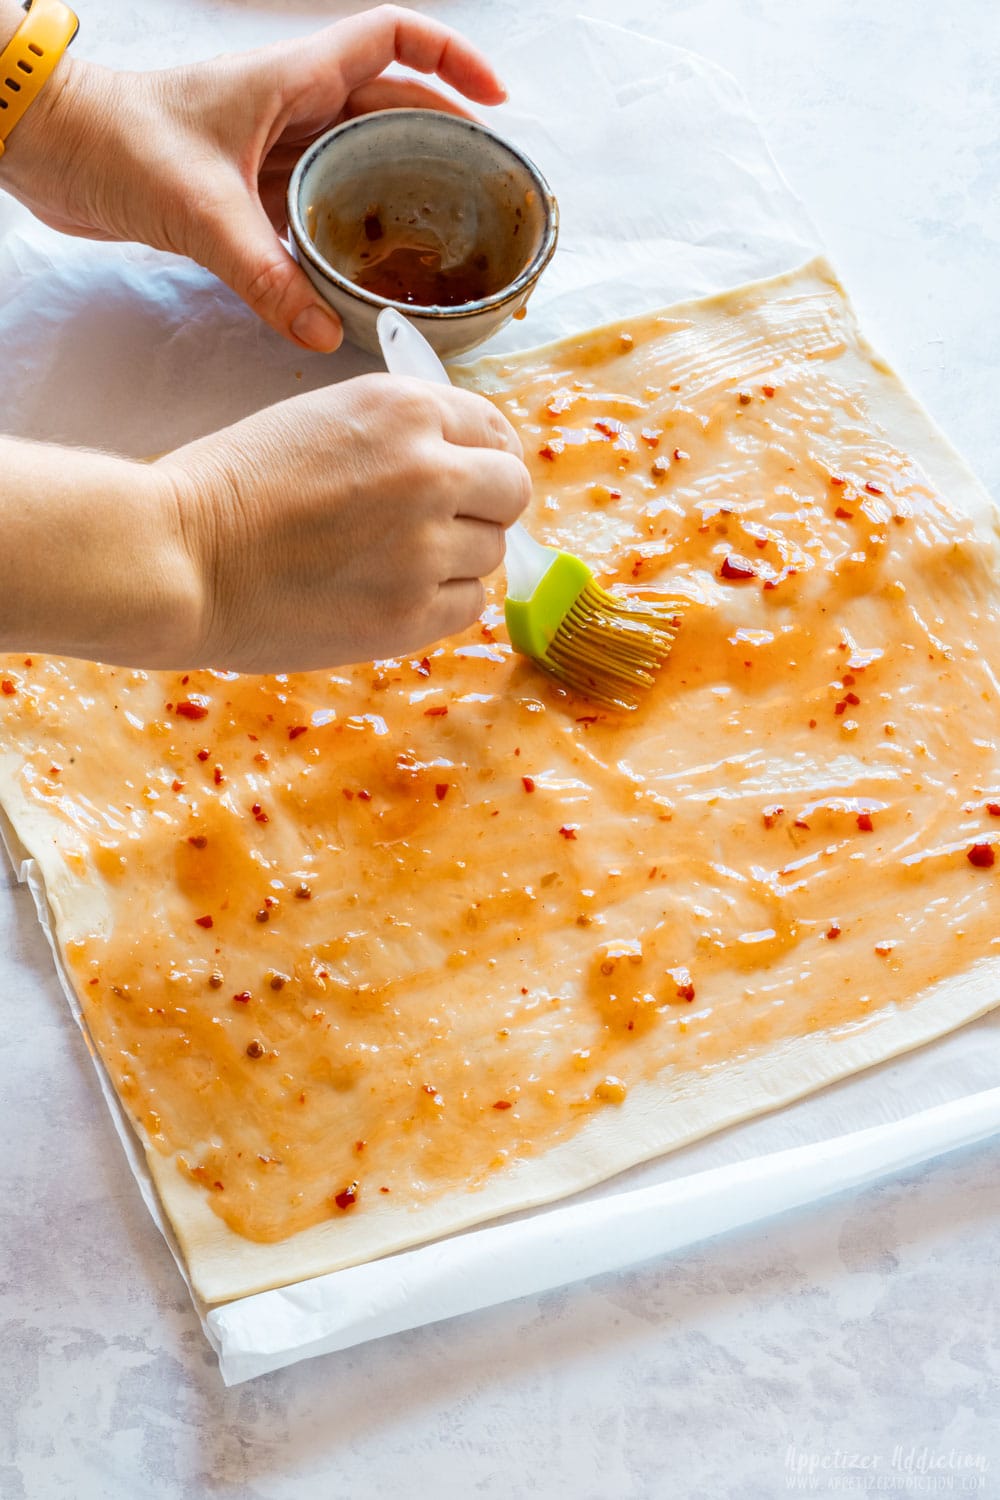 Spreading the sweet chili sauce on puff pastry.